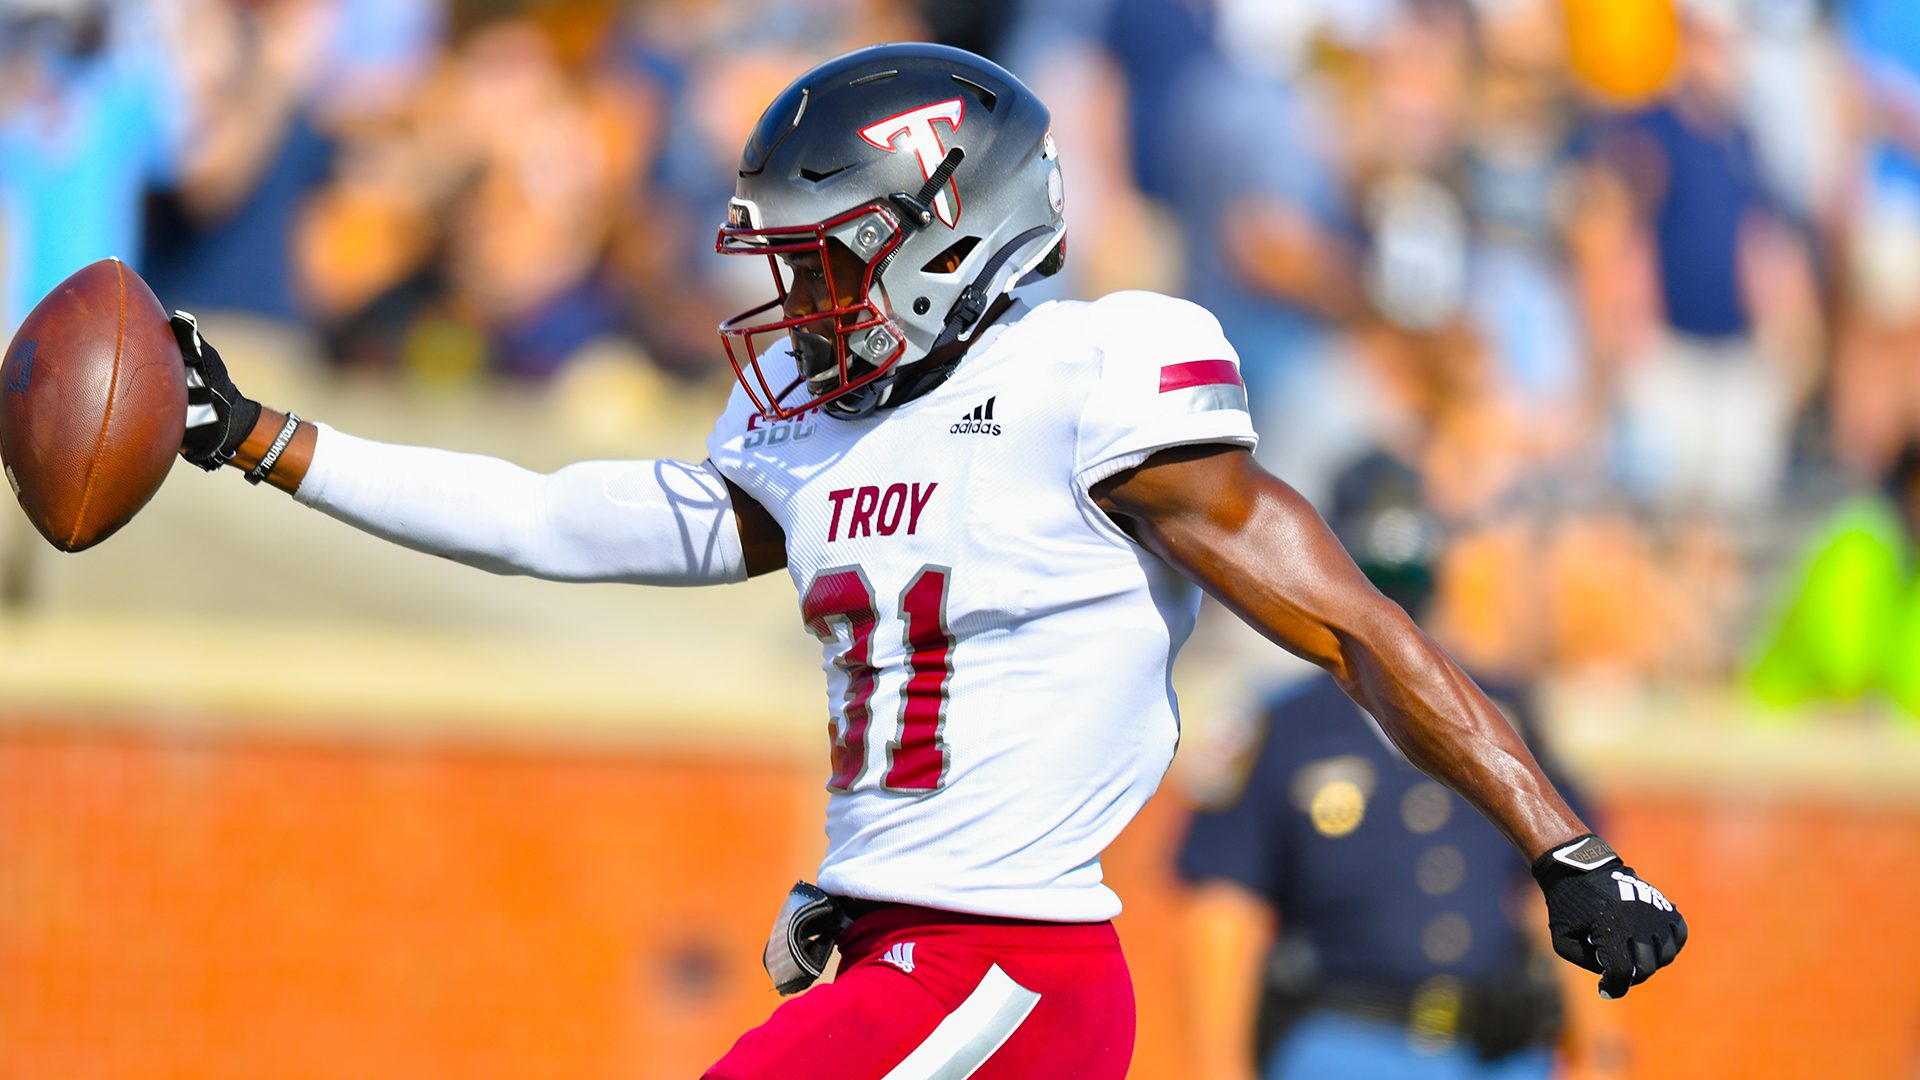 Dell Pettus is an effective run defender for the Troy Trojans who's a good open field tackler, Hula Bowl scout Tyler Moore breaks down Pettus as an NFL Prospect in his report.